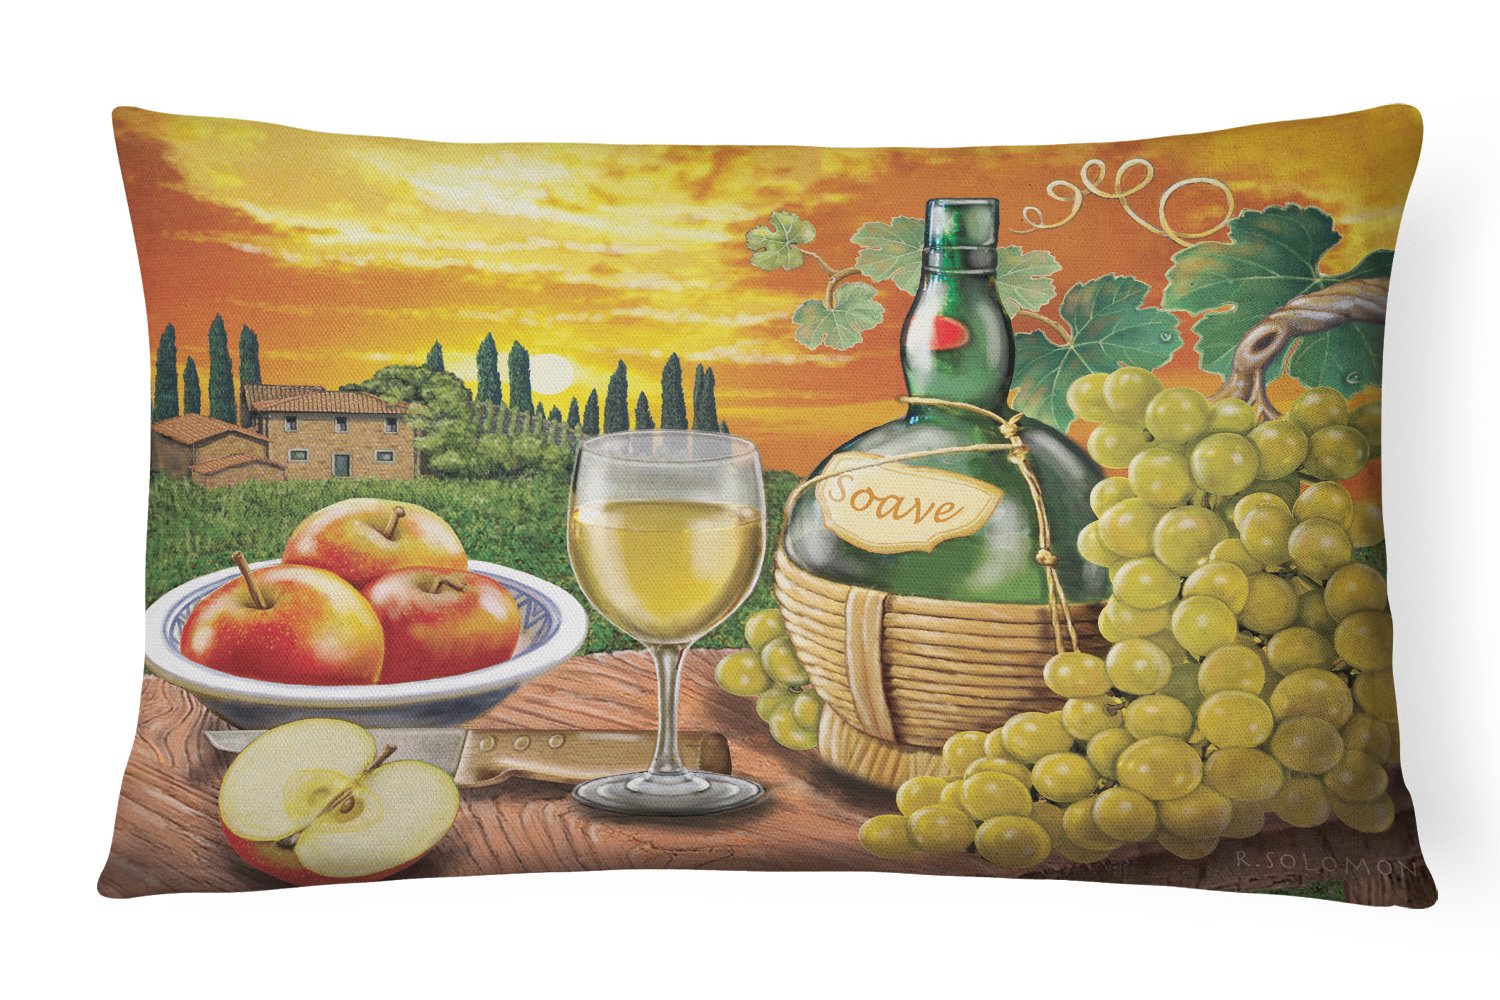 Soave, Apple, Wine and Cheese Canvas Fabric Decorative Pillow PRS4027PW1216 by Caroline's Treasures